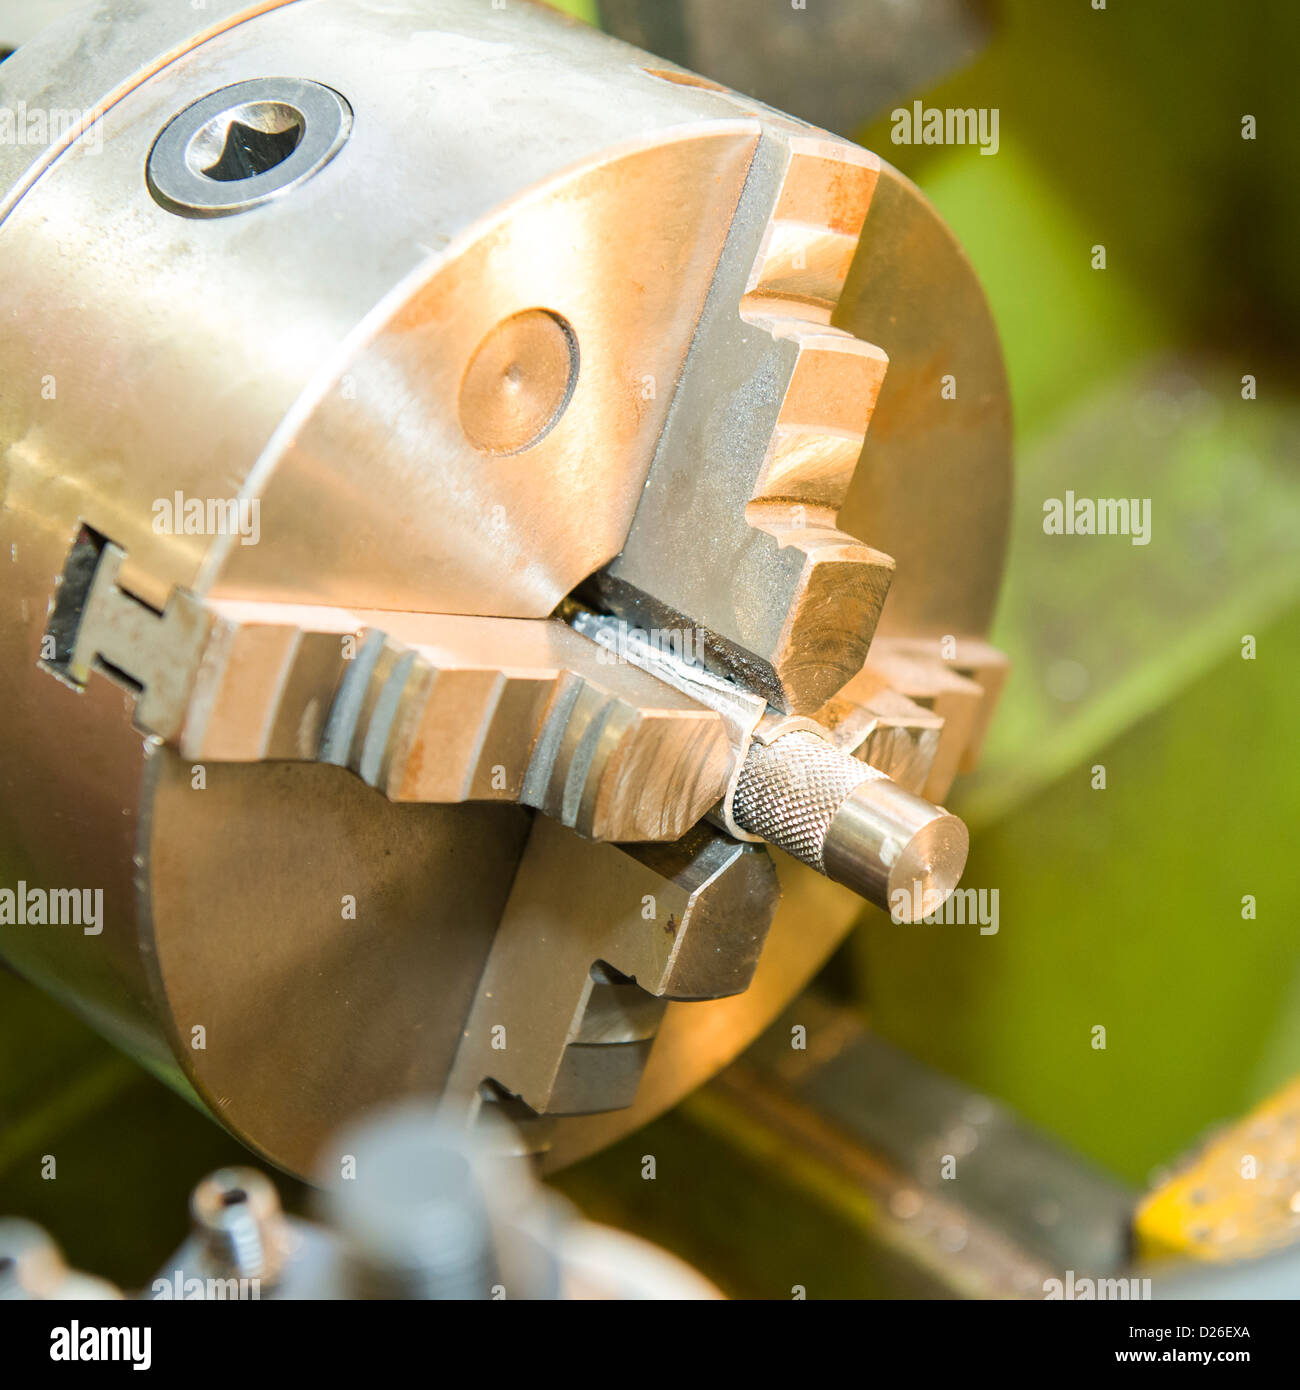 A metal part held in an industrial metal turning lathe using a four jaw chuck Stock Photo